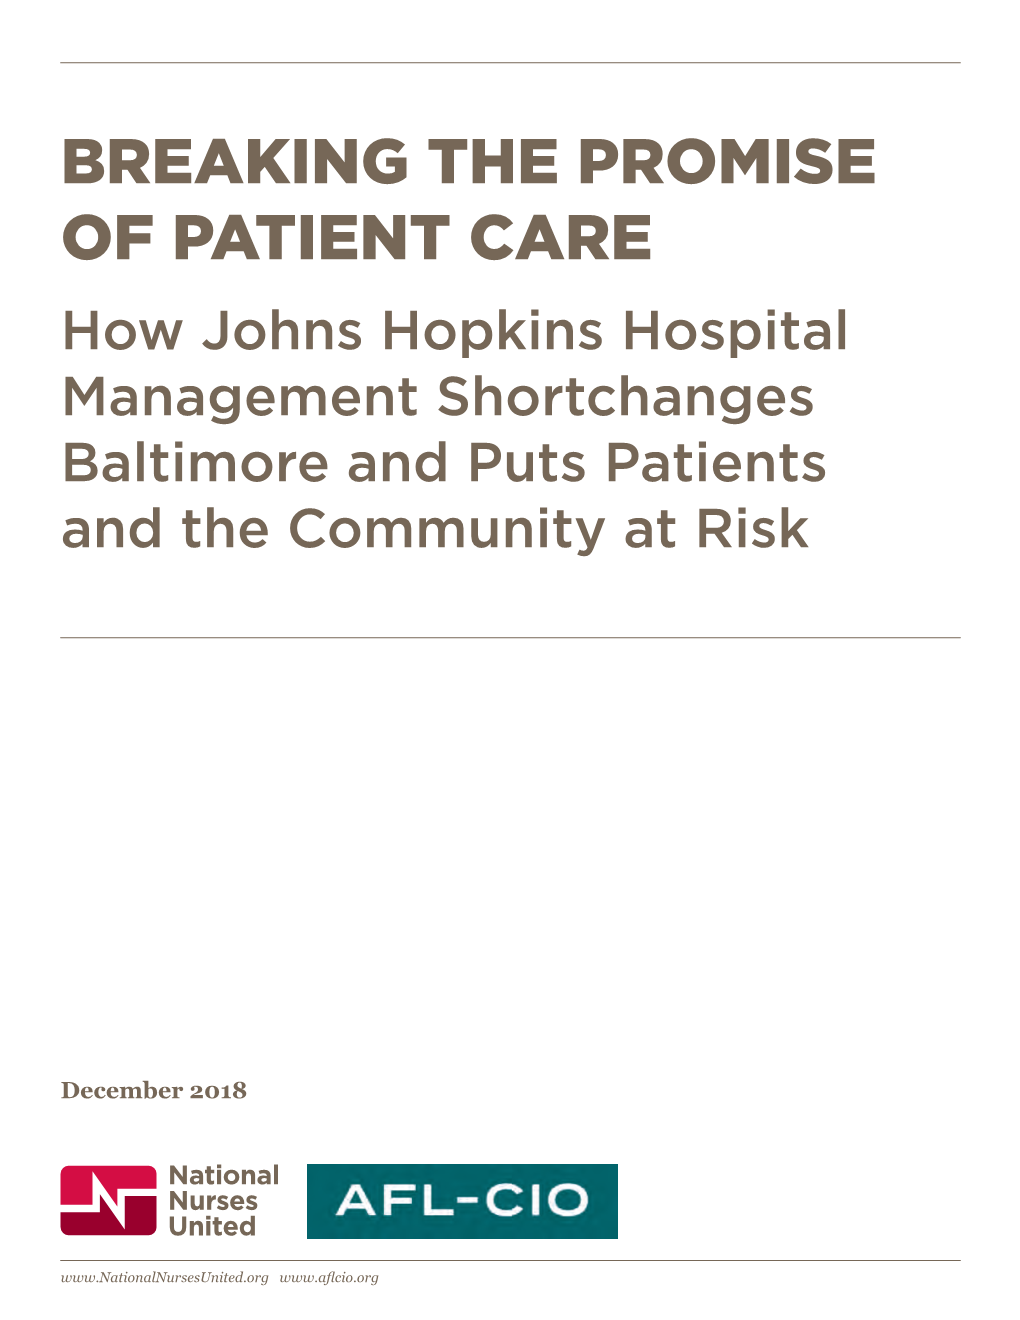 Breaking the Promise of Patient Care: How Johns Hopkins Hospital Management Shortchanges Baltimore and Puts Patients